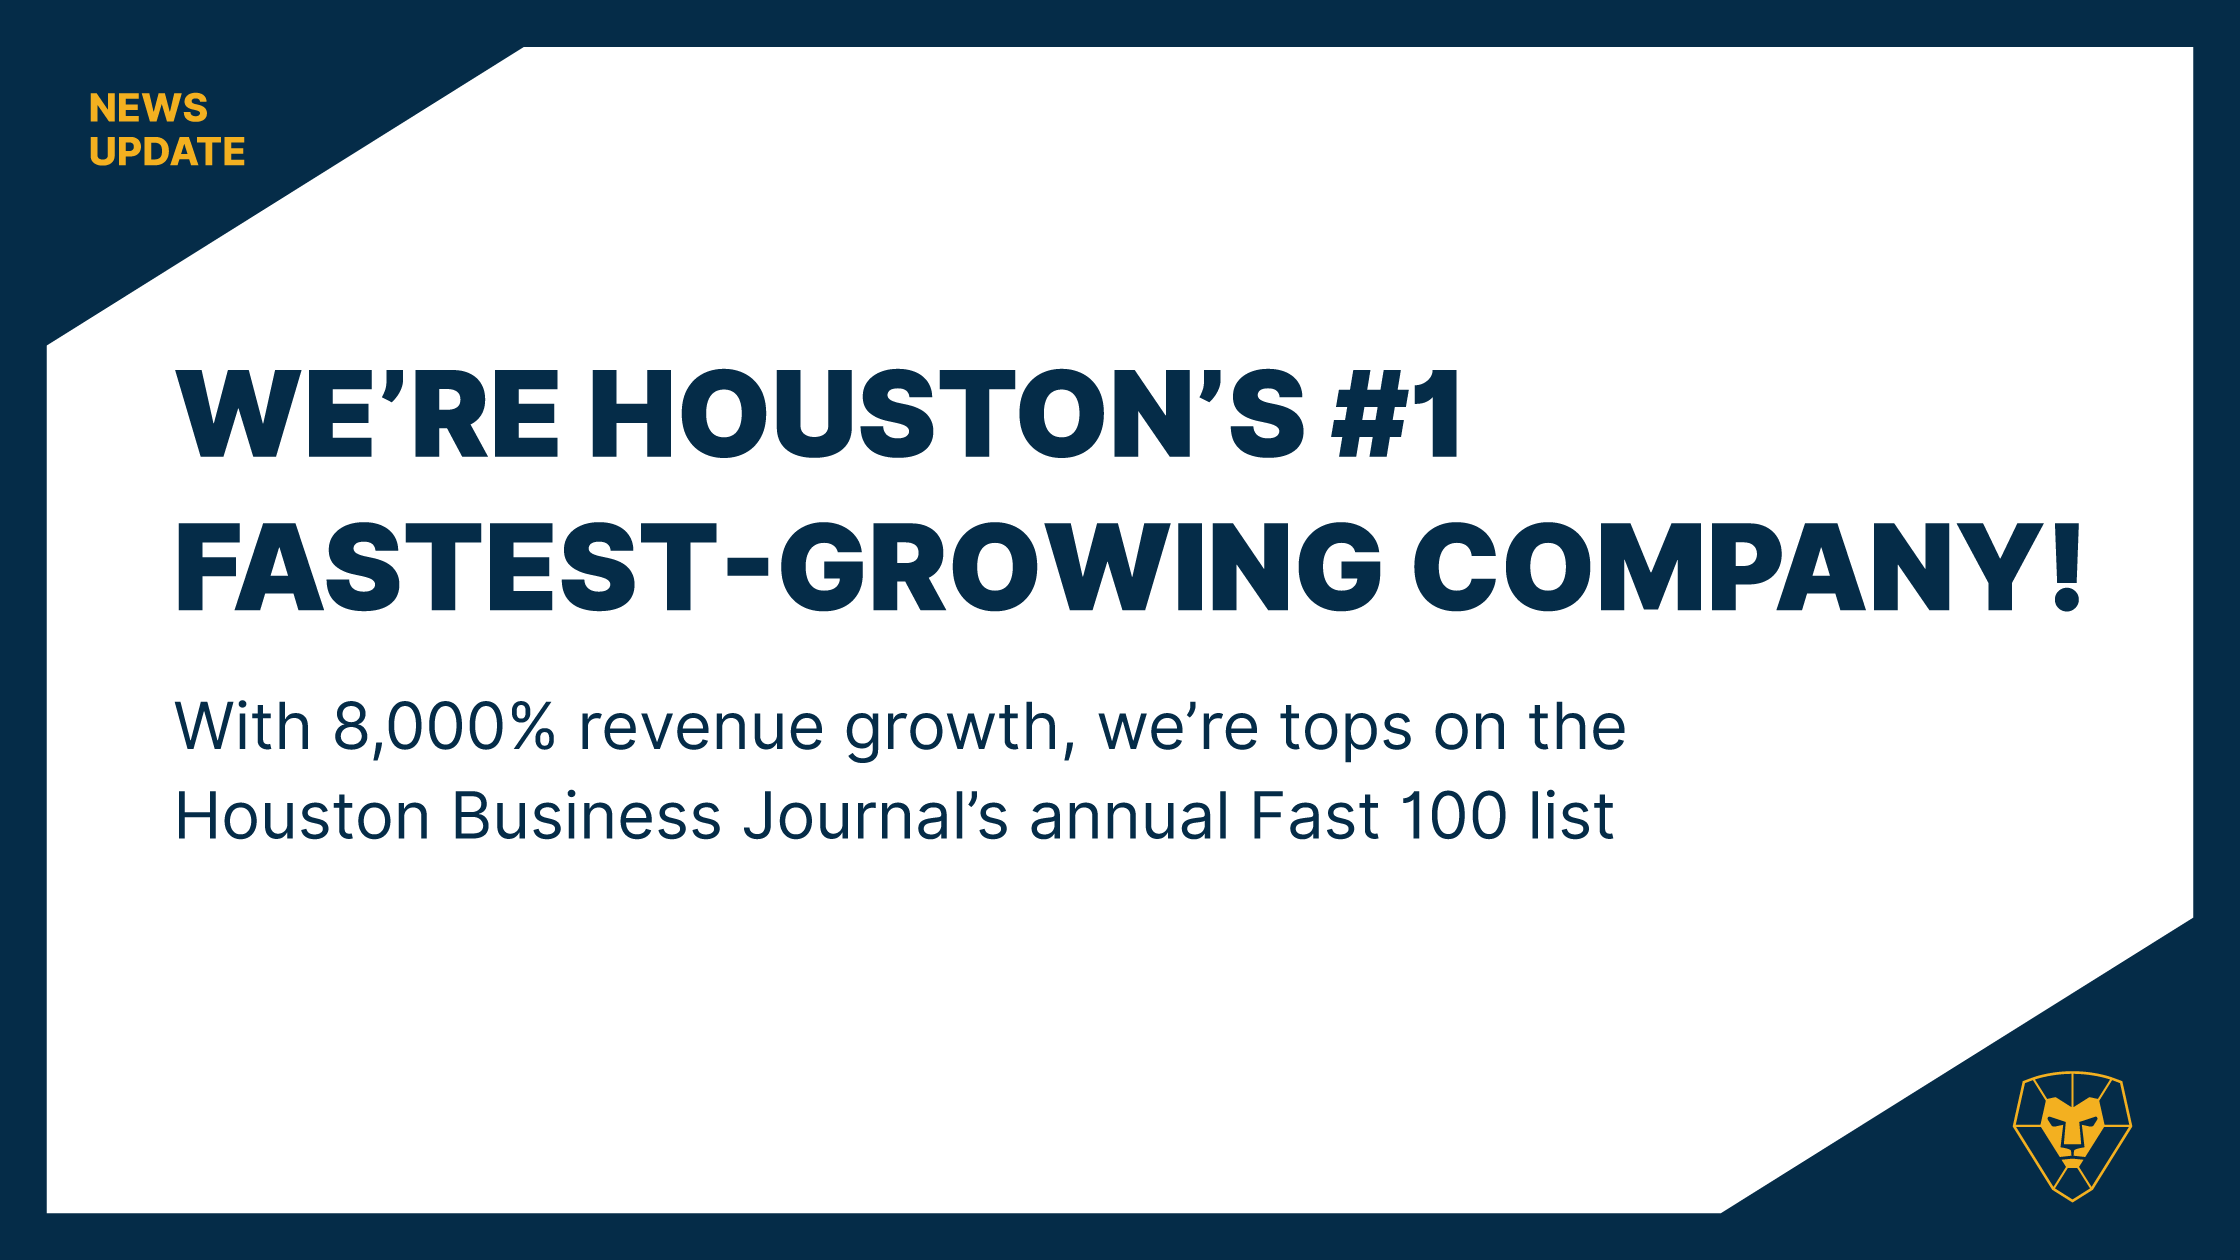 Liongard is Houston's Fastest Growing Company